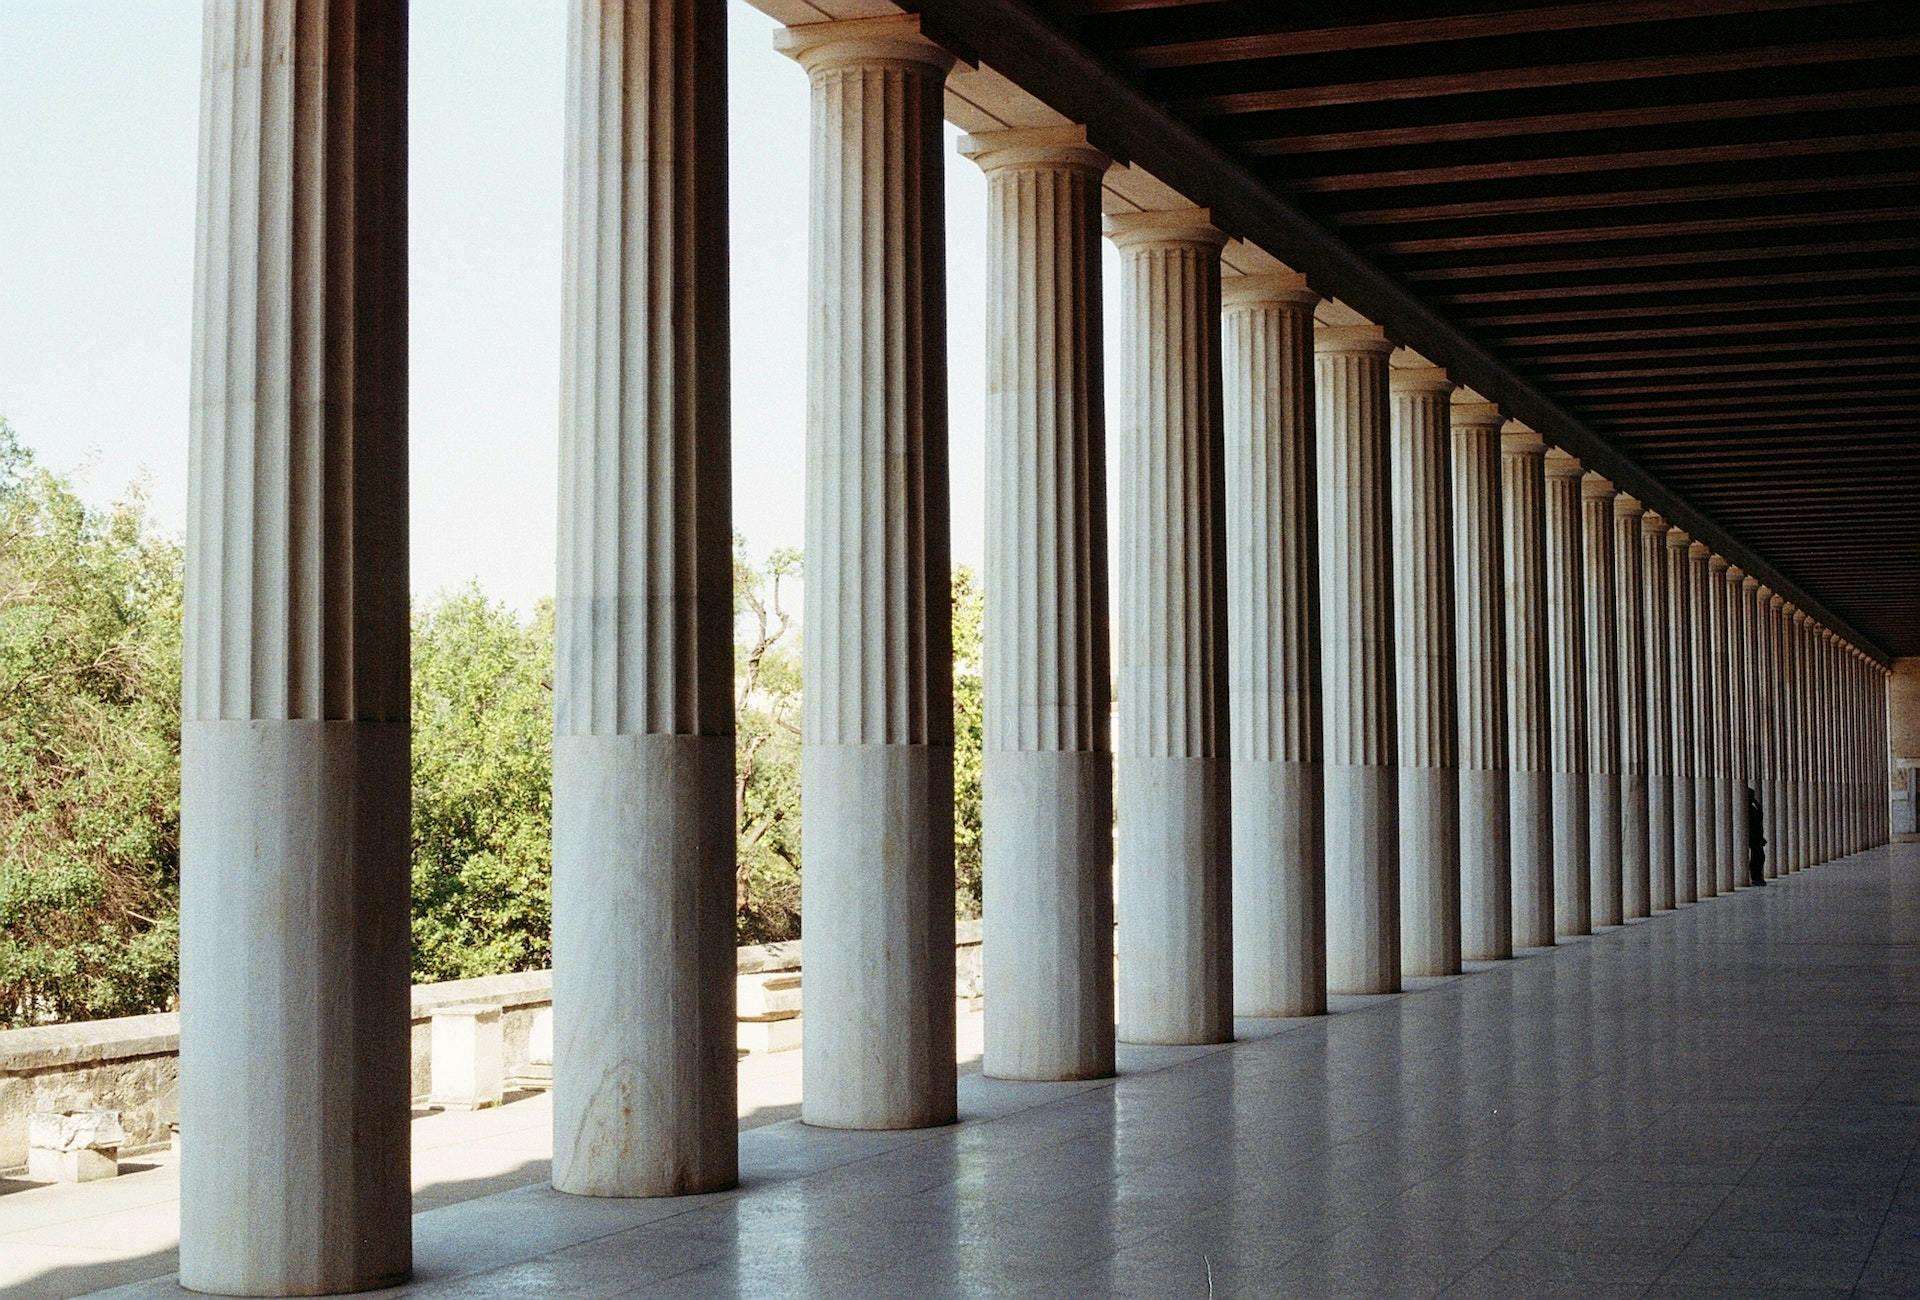 The public buildings of ancient Athens